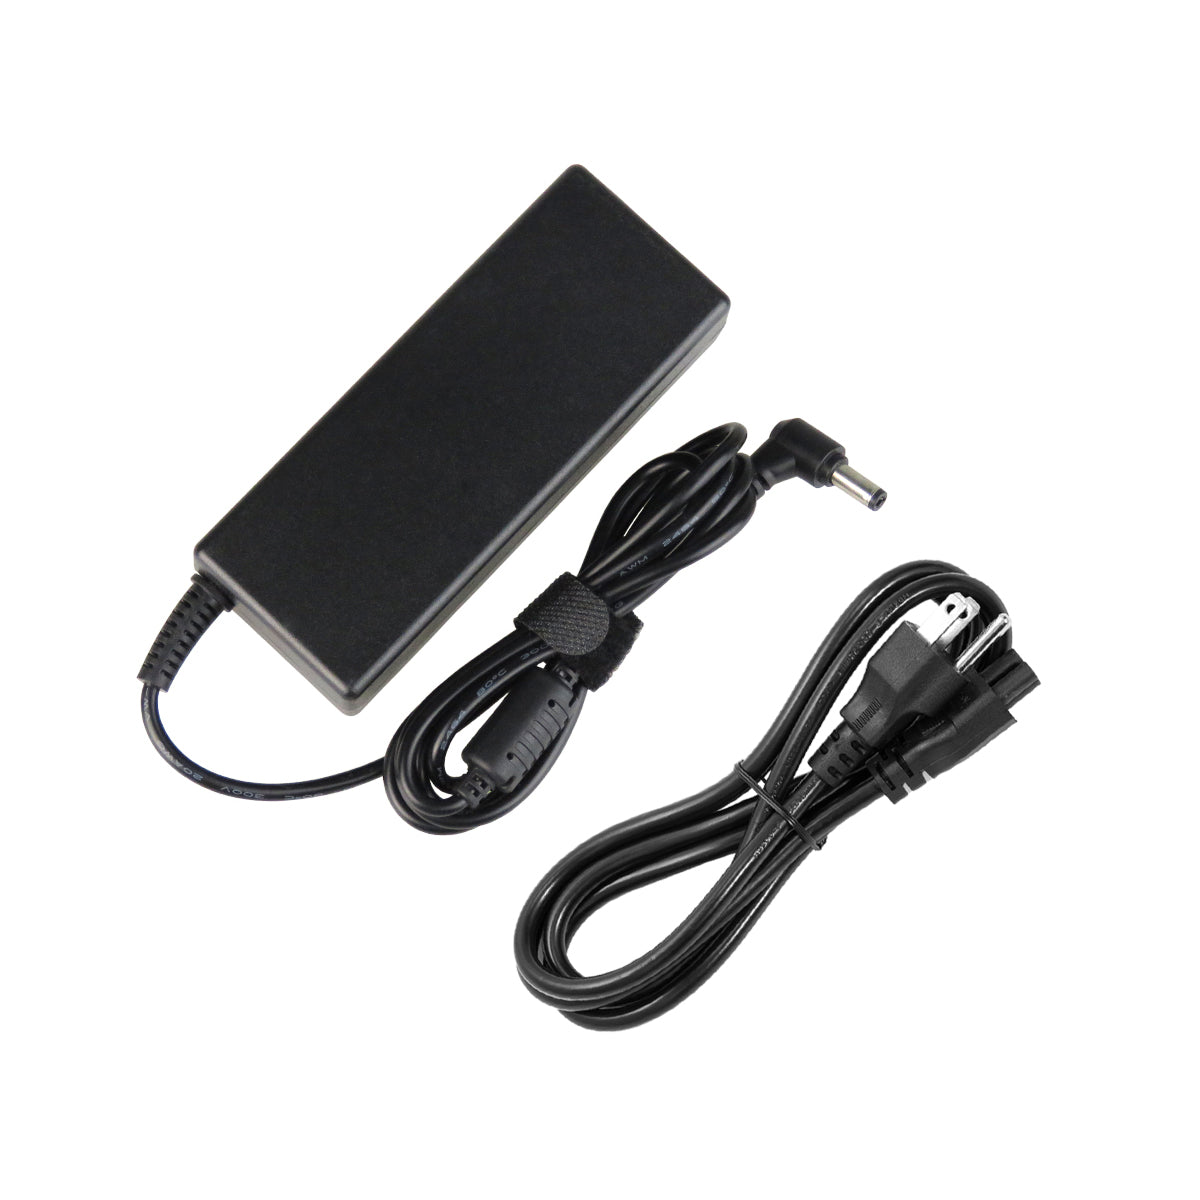 AC Adapter Charger for Toshiba Satellite L855 Notebook.